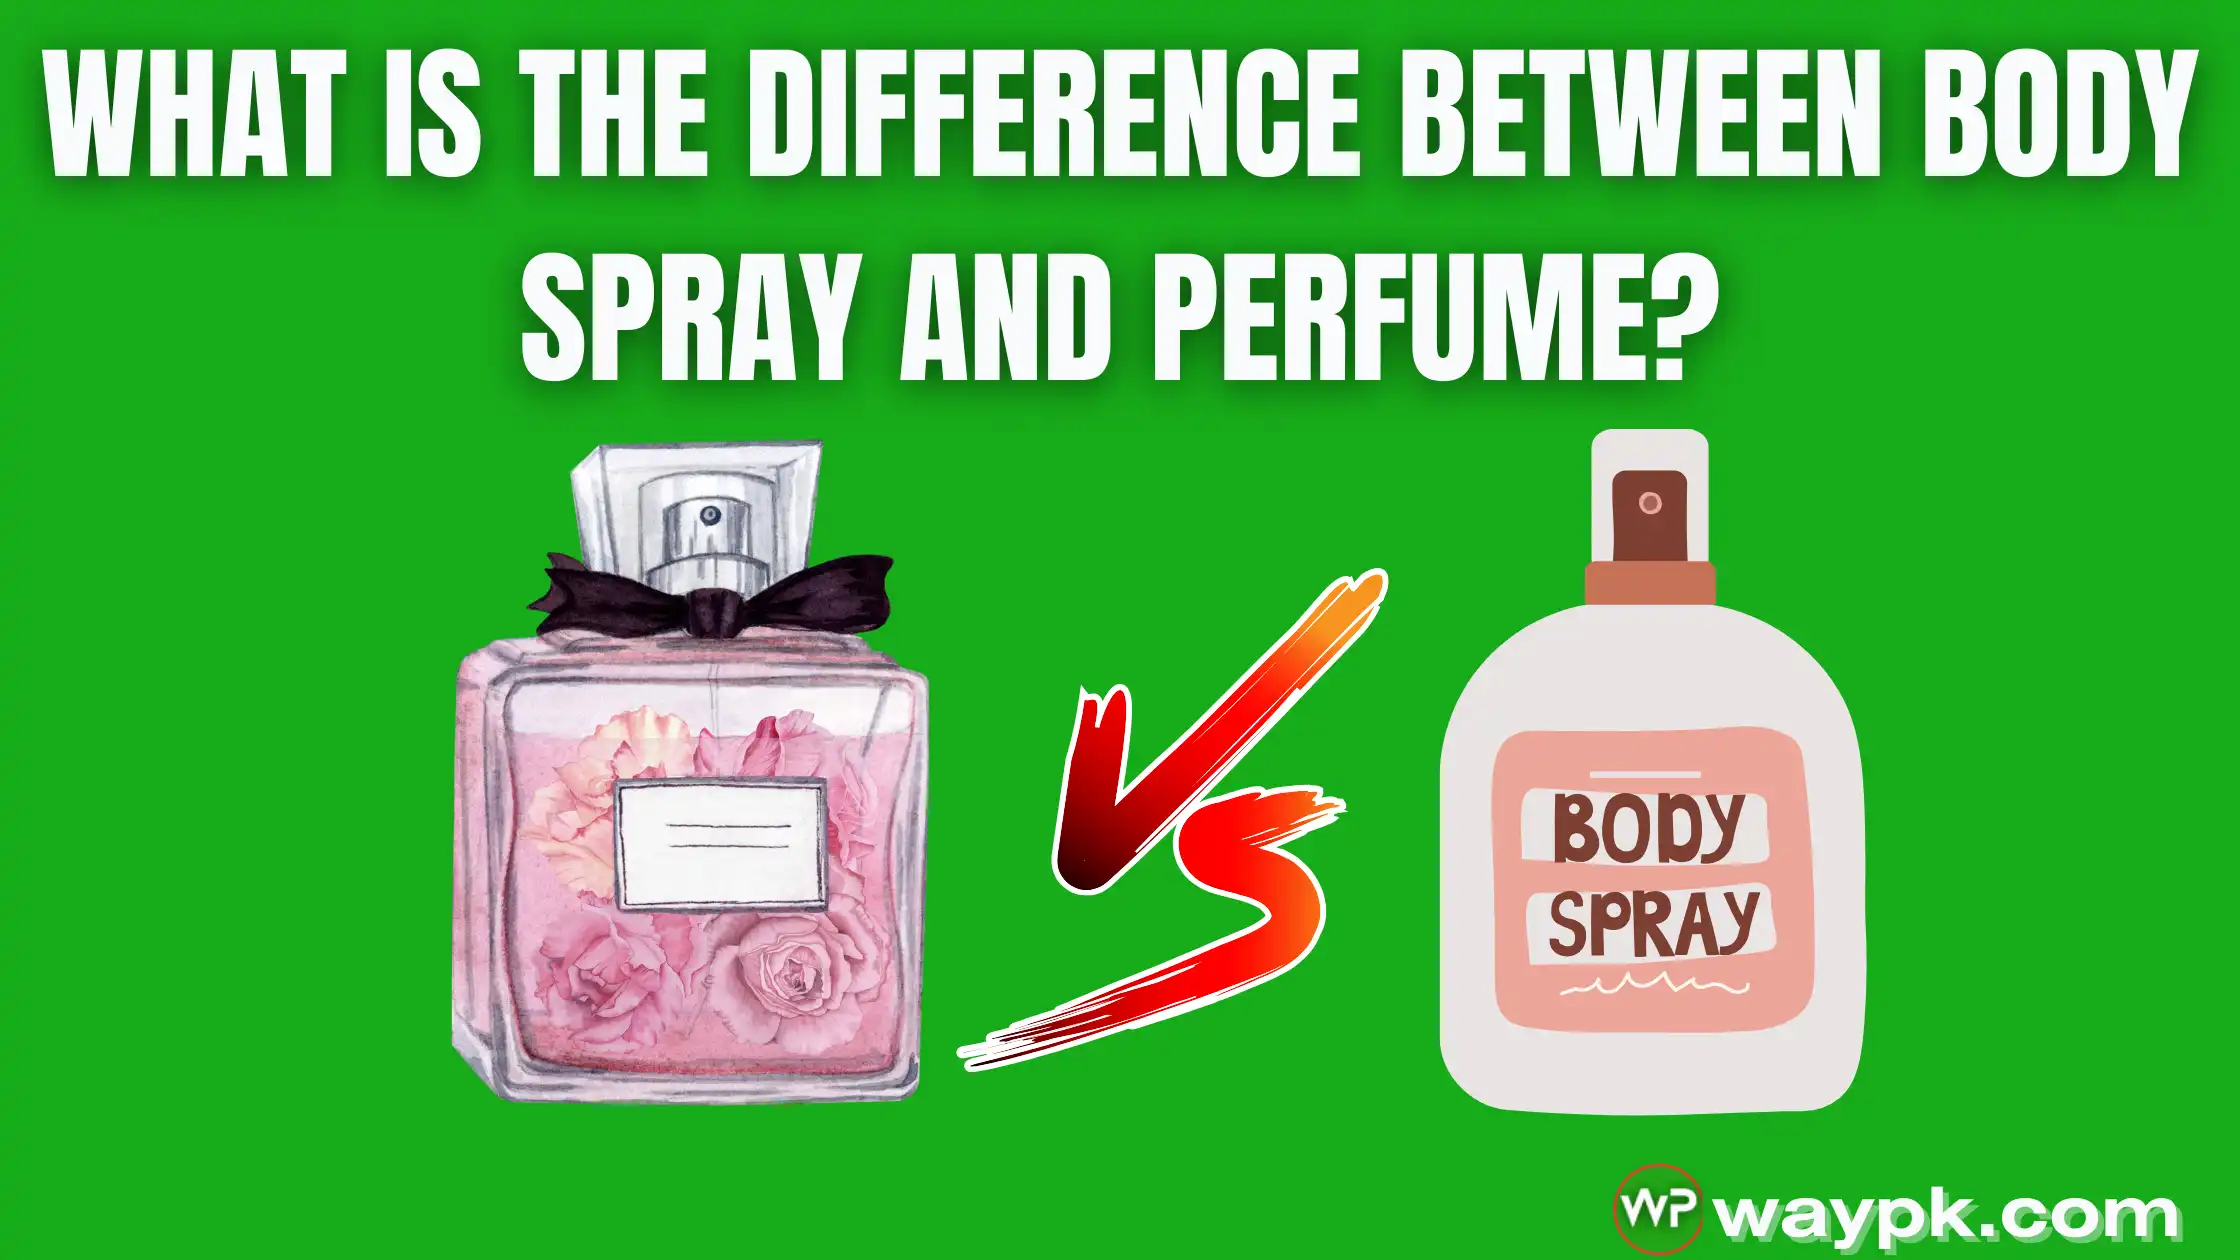 What Is The Difference Between Body Spray And Perfume